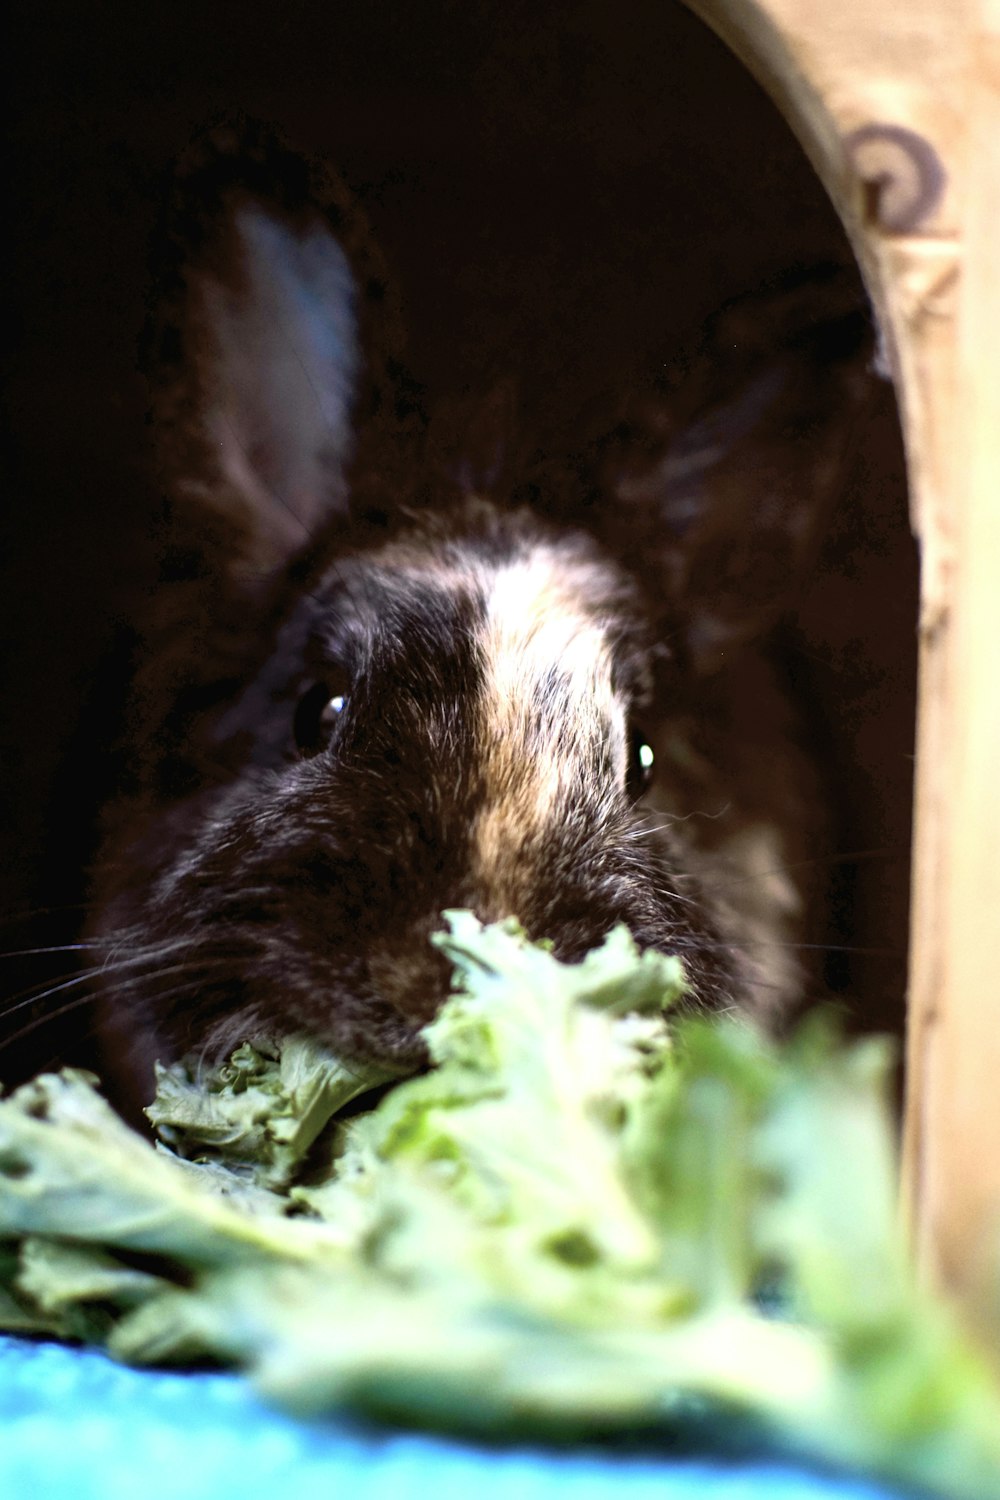 a close up of a rabbit eating a piece of broccoli